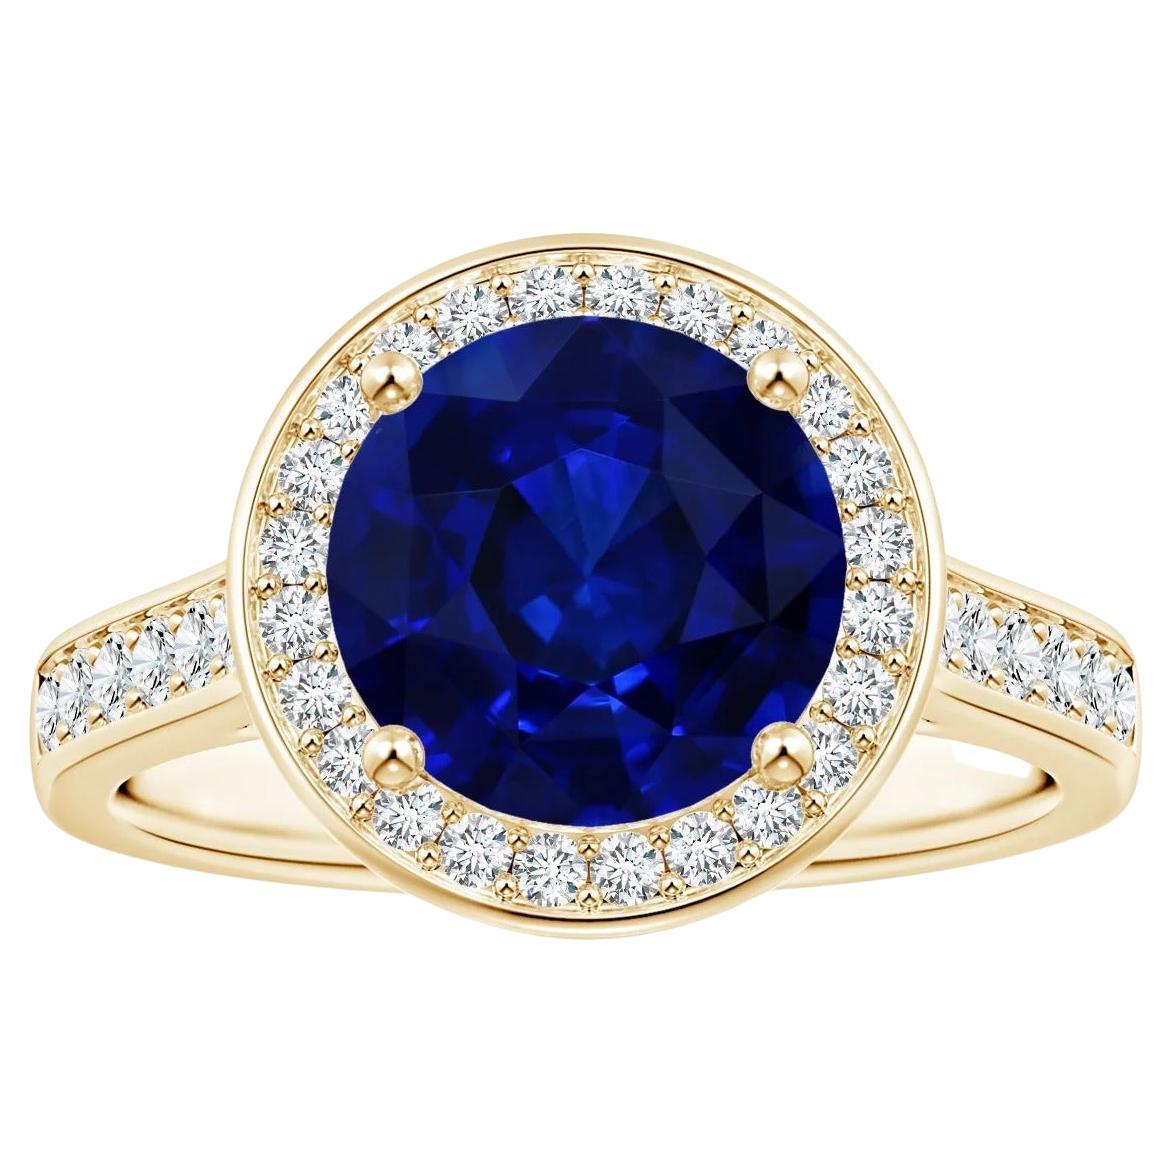 For Sale:  ANGARA GIA Certified Blue Sapphire Halo Ring in Yellow Gold with Diamonds